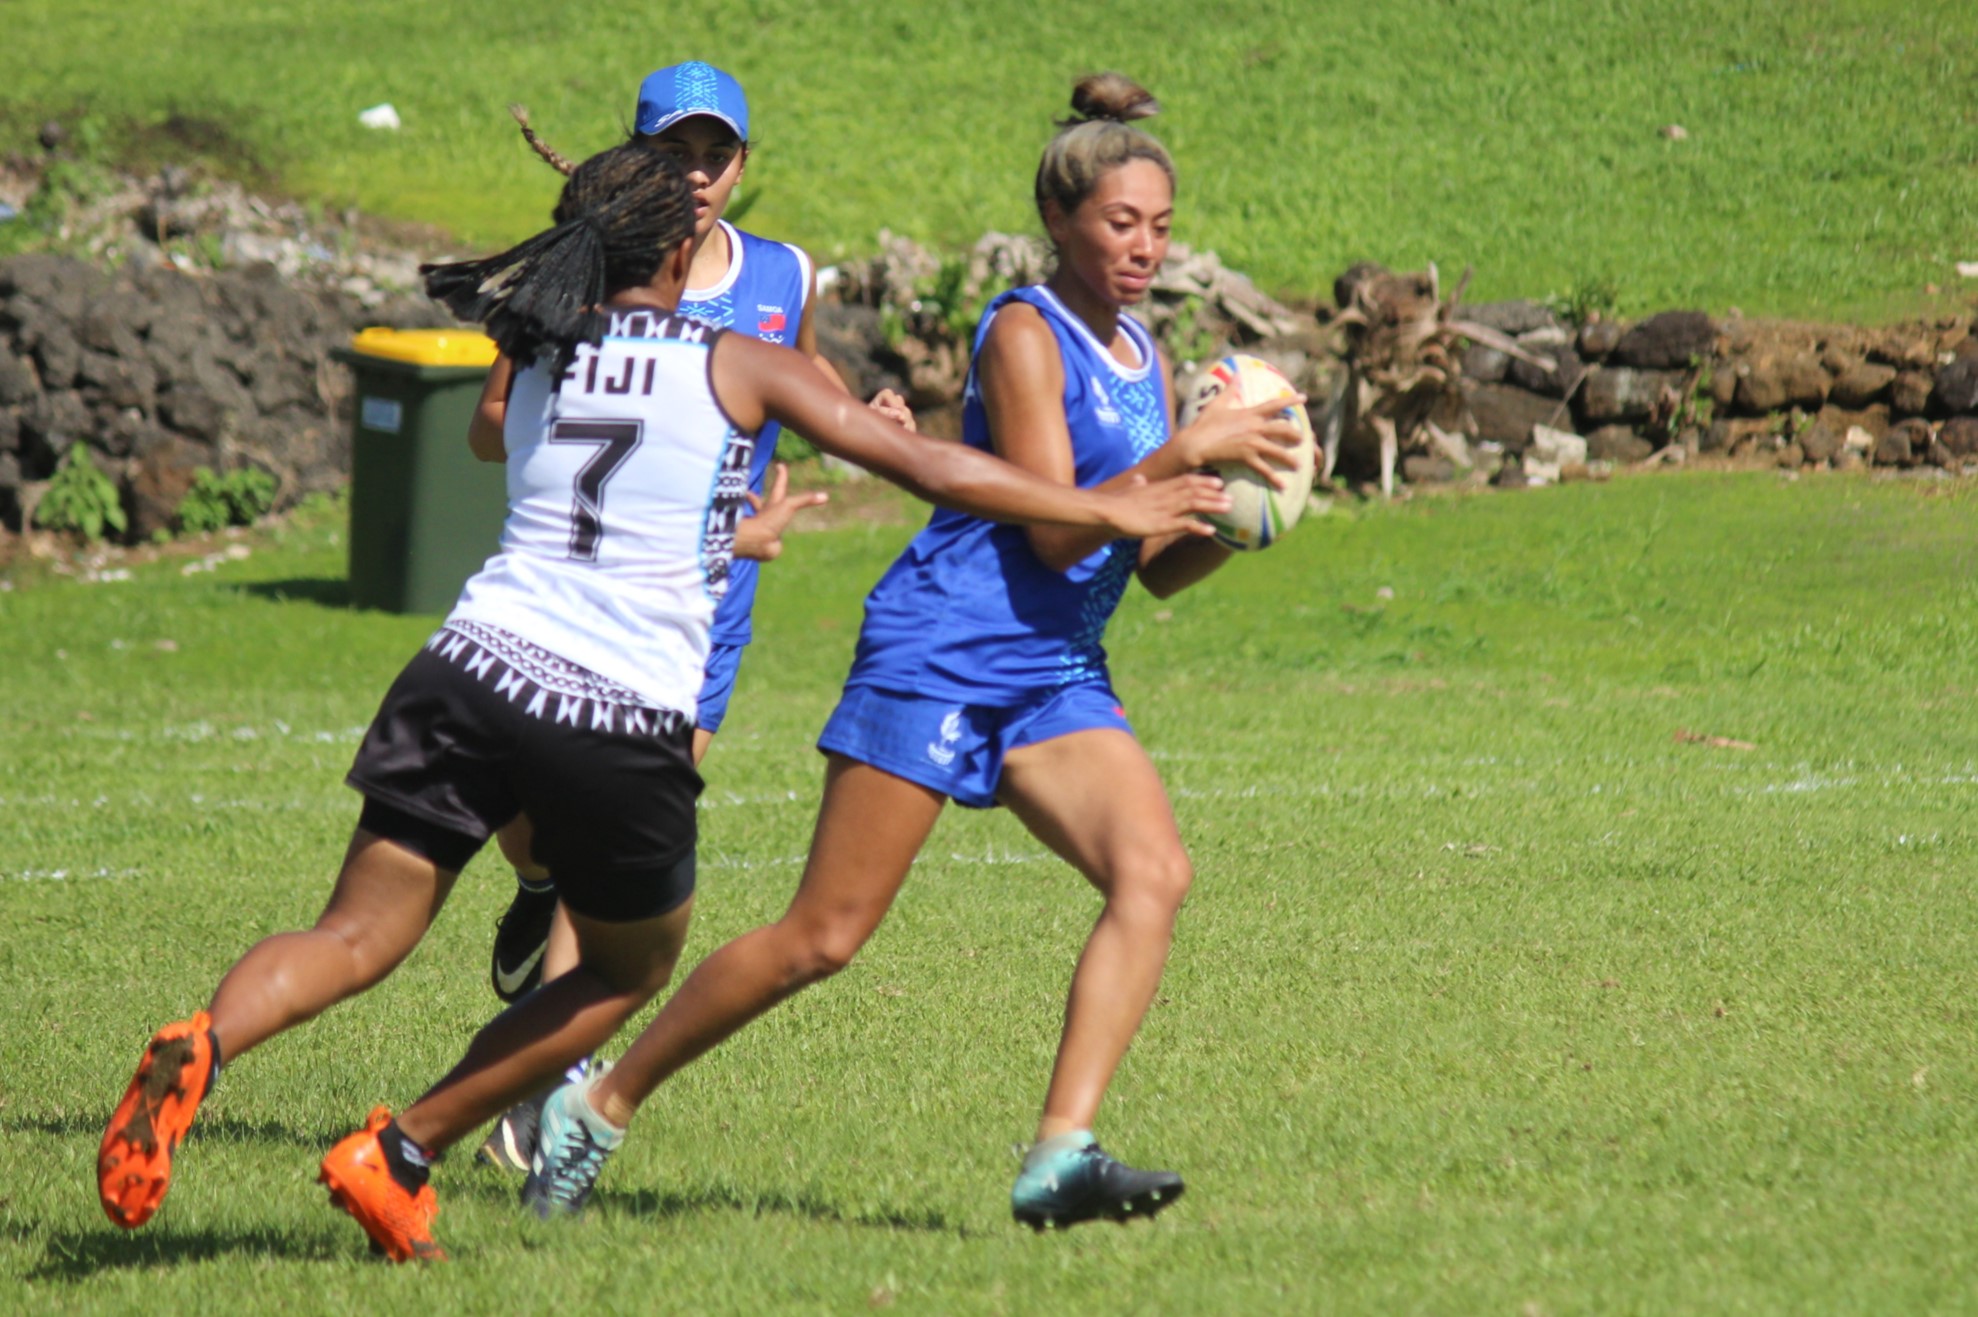 Women playing touch rugby